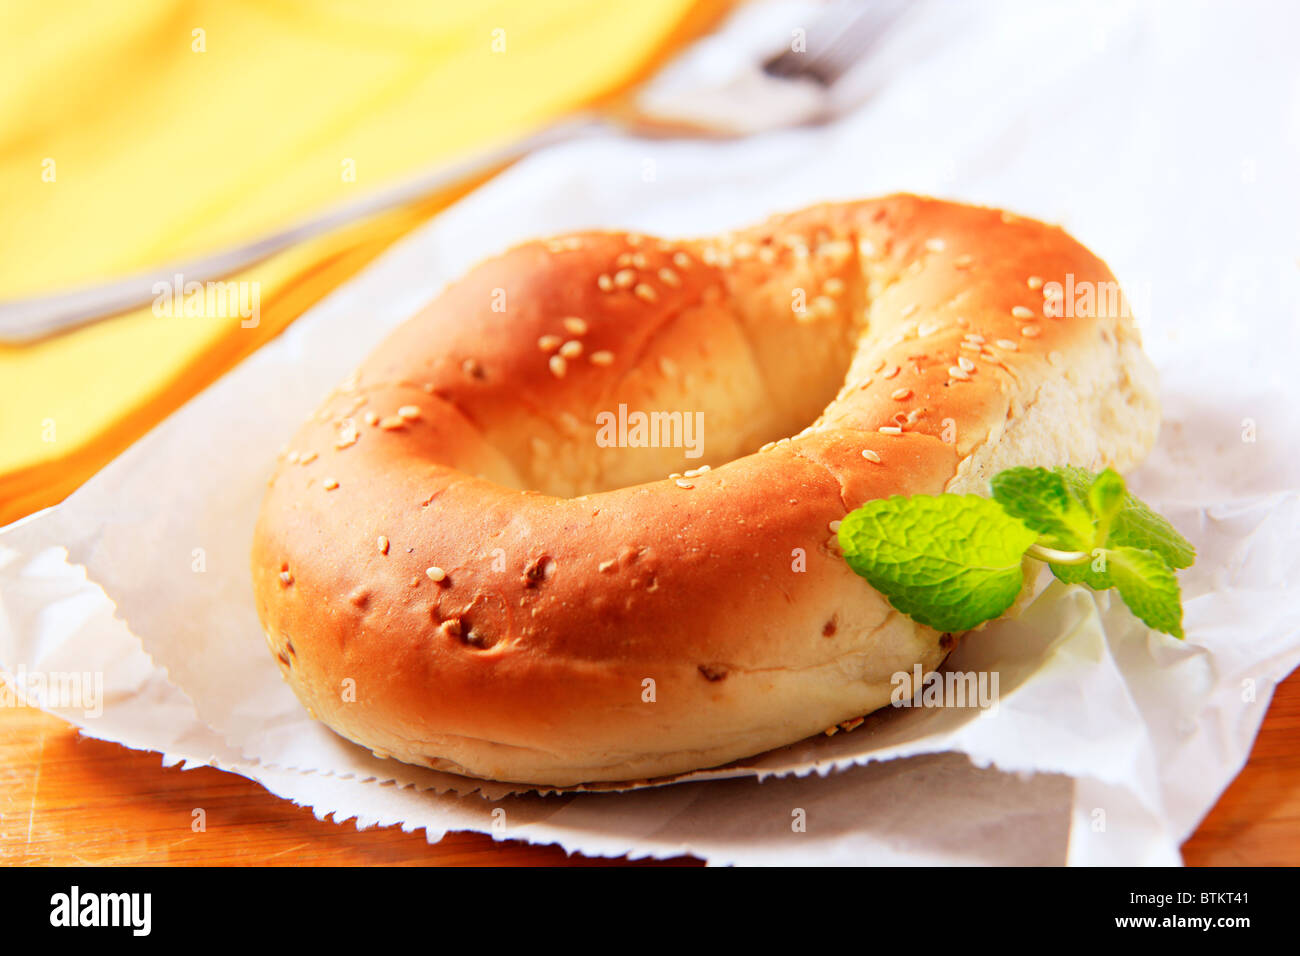 Bagel topped with sesame seeds on a paper bag Stock Photo